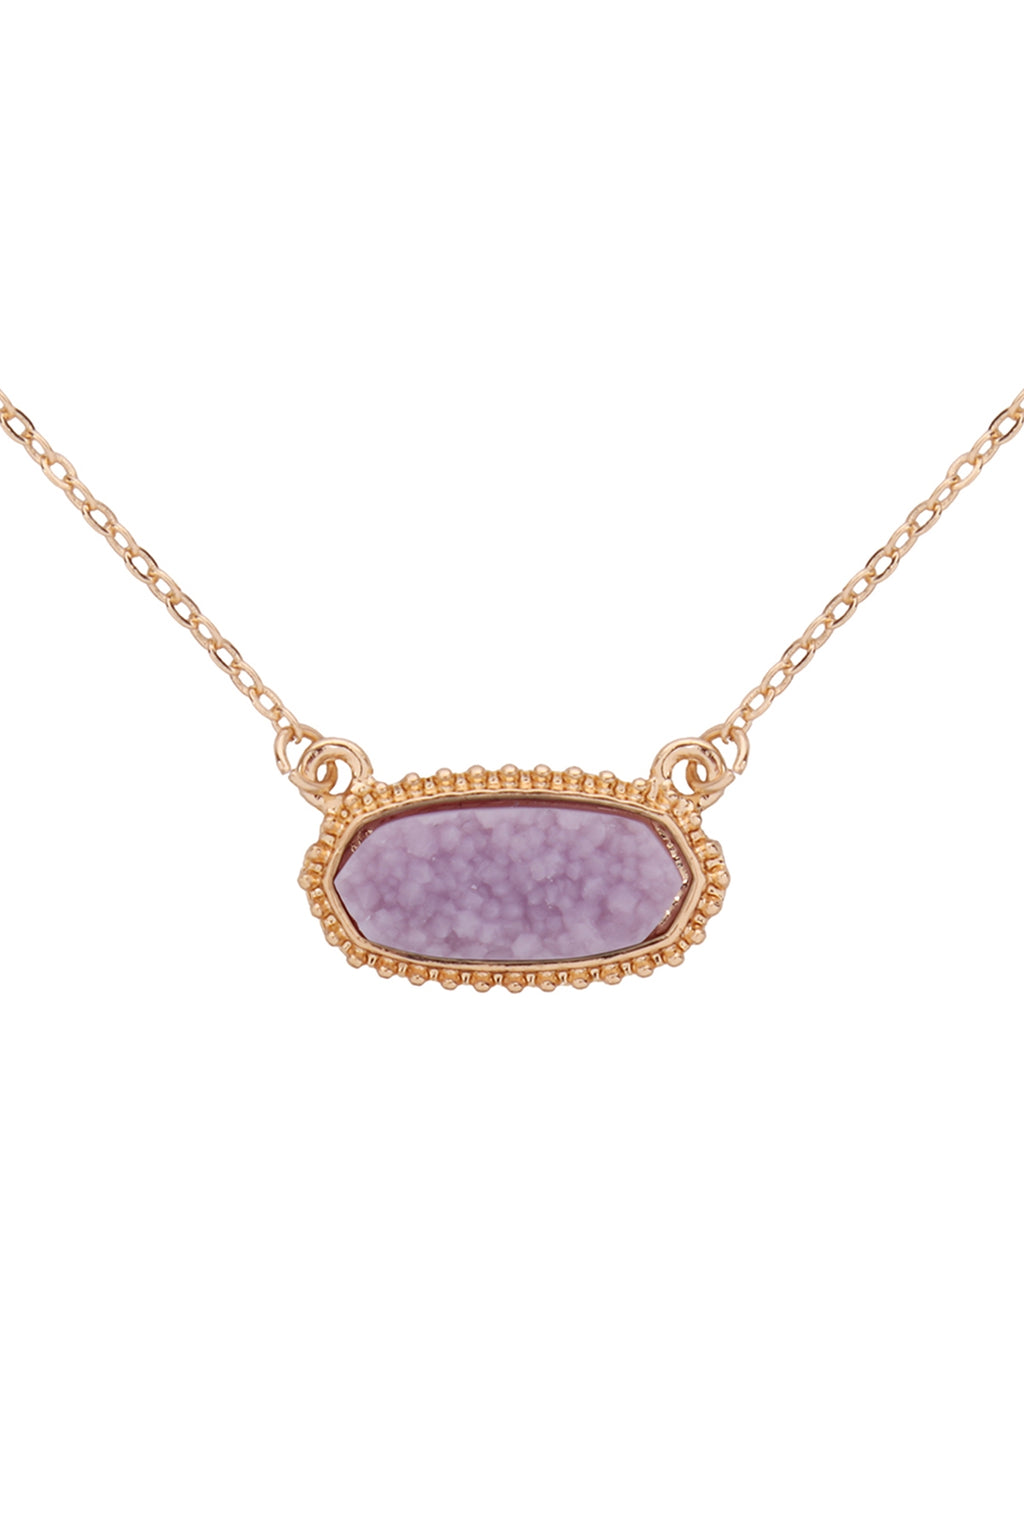 Lavender Druzy Oval Stone Pendant Necklace and Earring Set - Pack of 6